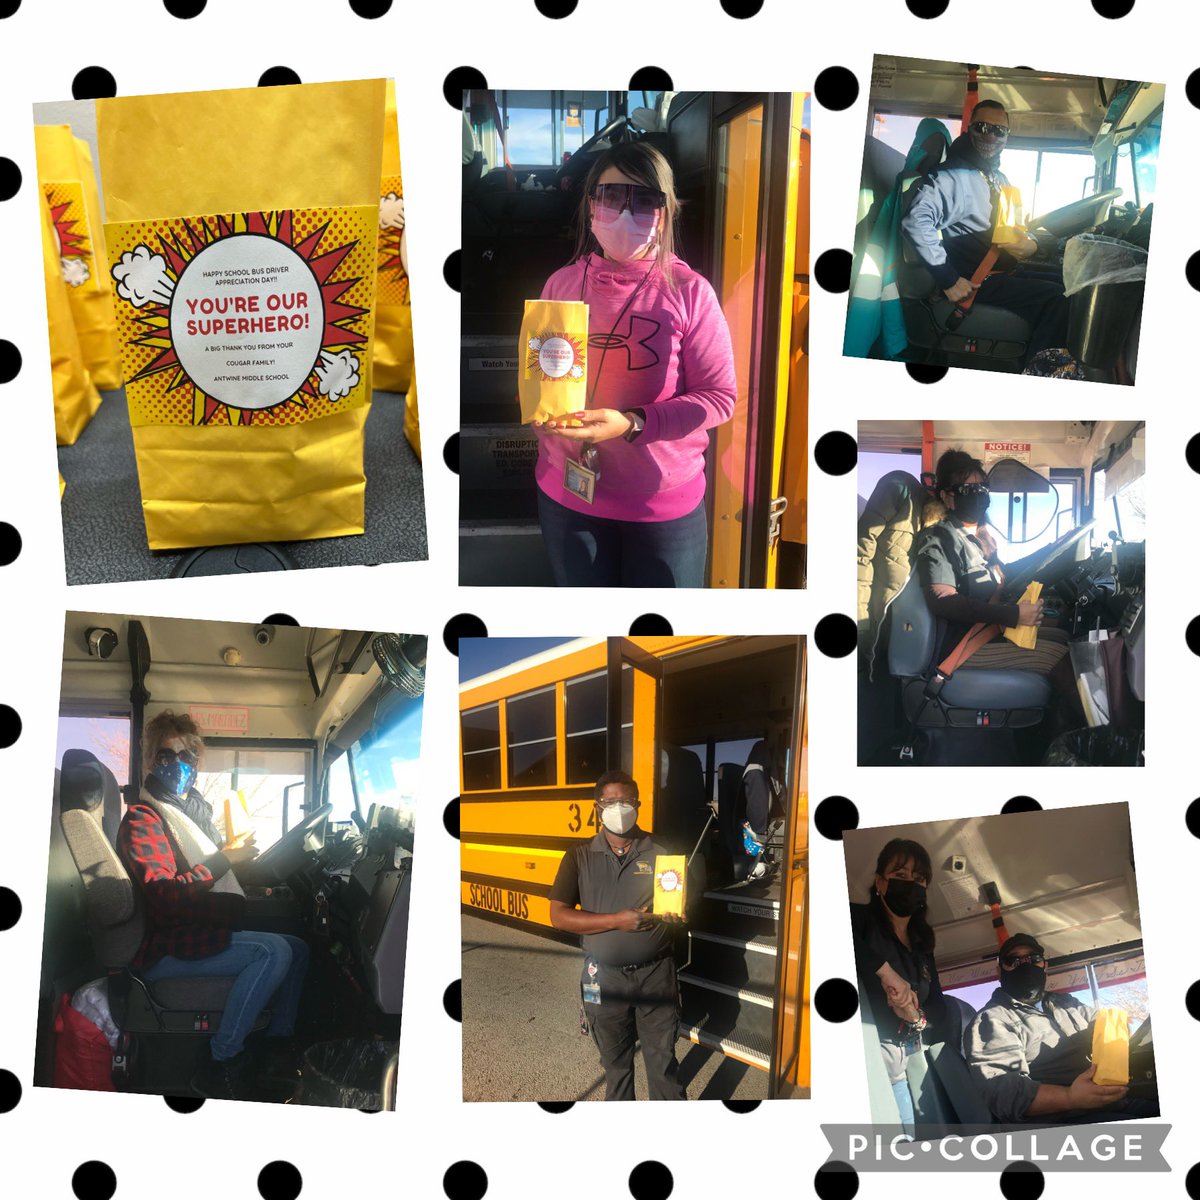 A little something for our bus 🚌 drivers that get our scholars to school safely everyday. Thank you for going the extra mile! #TeamSISD #ReigniteOurPurpose #SchoolBusDriverAppreciationDay